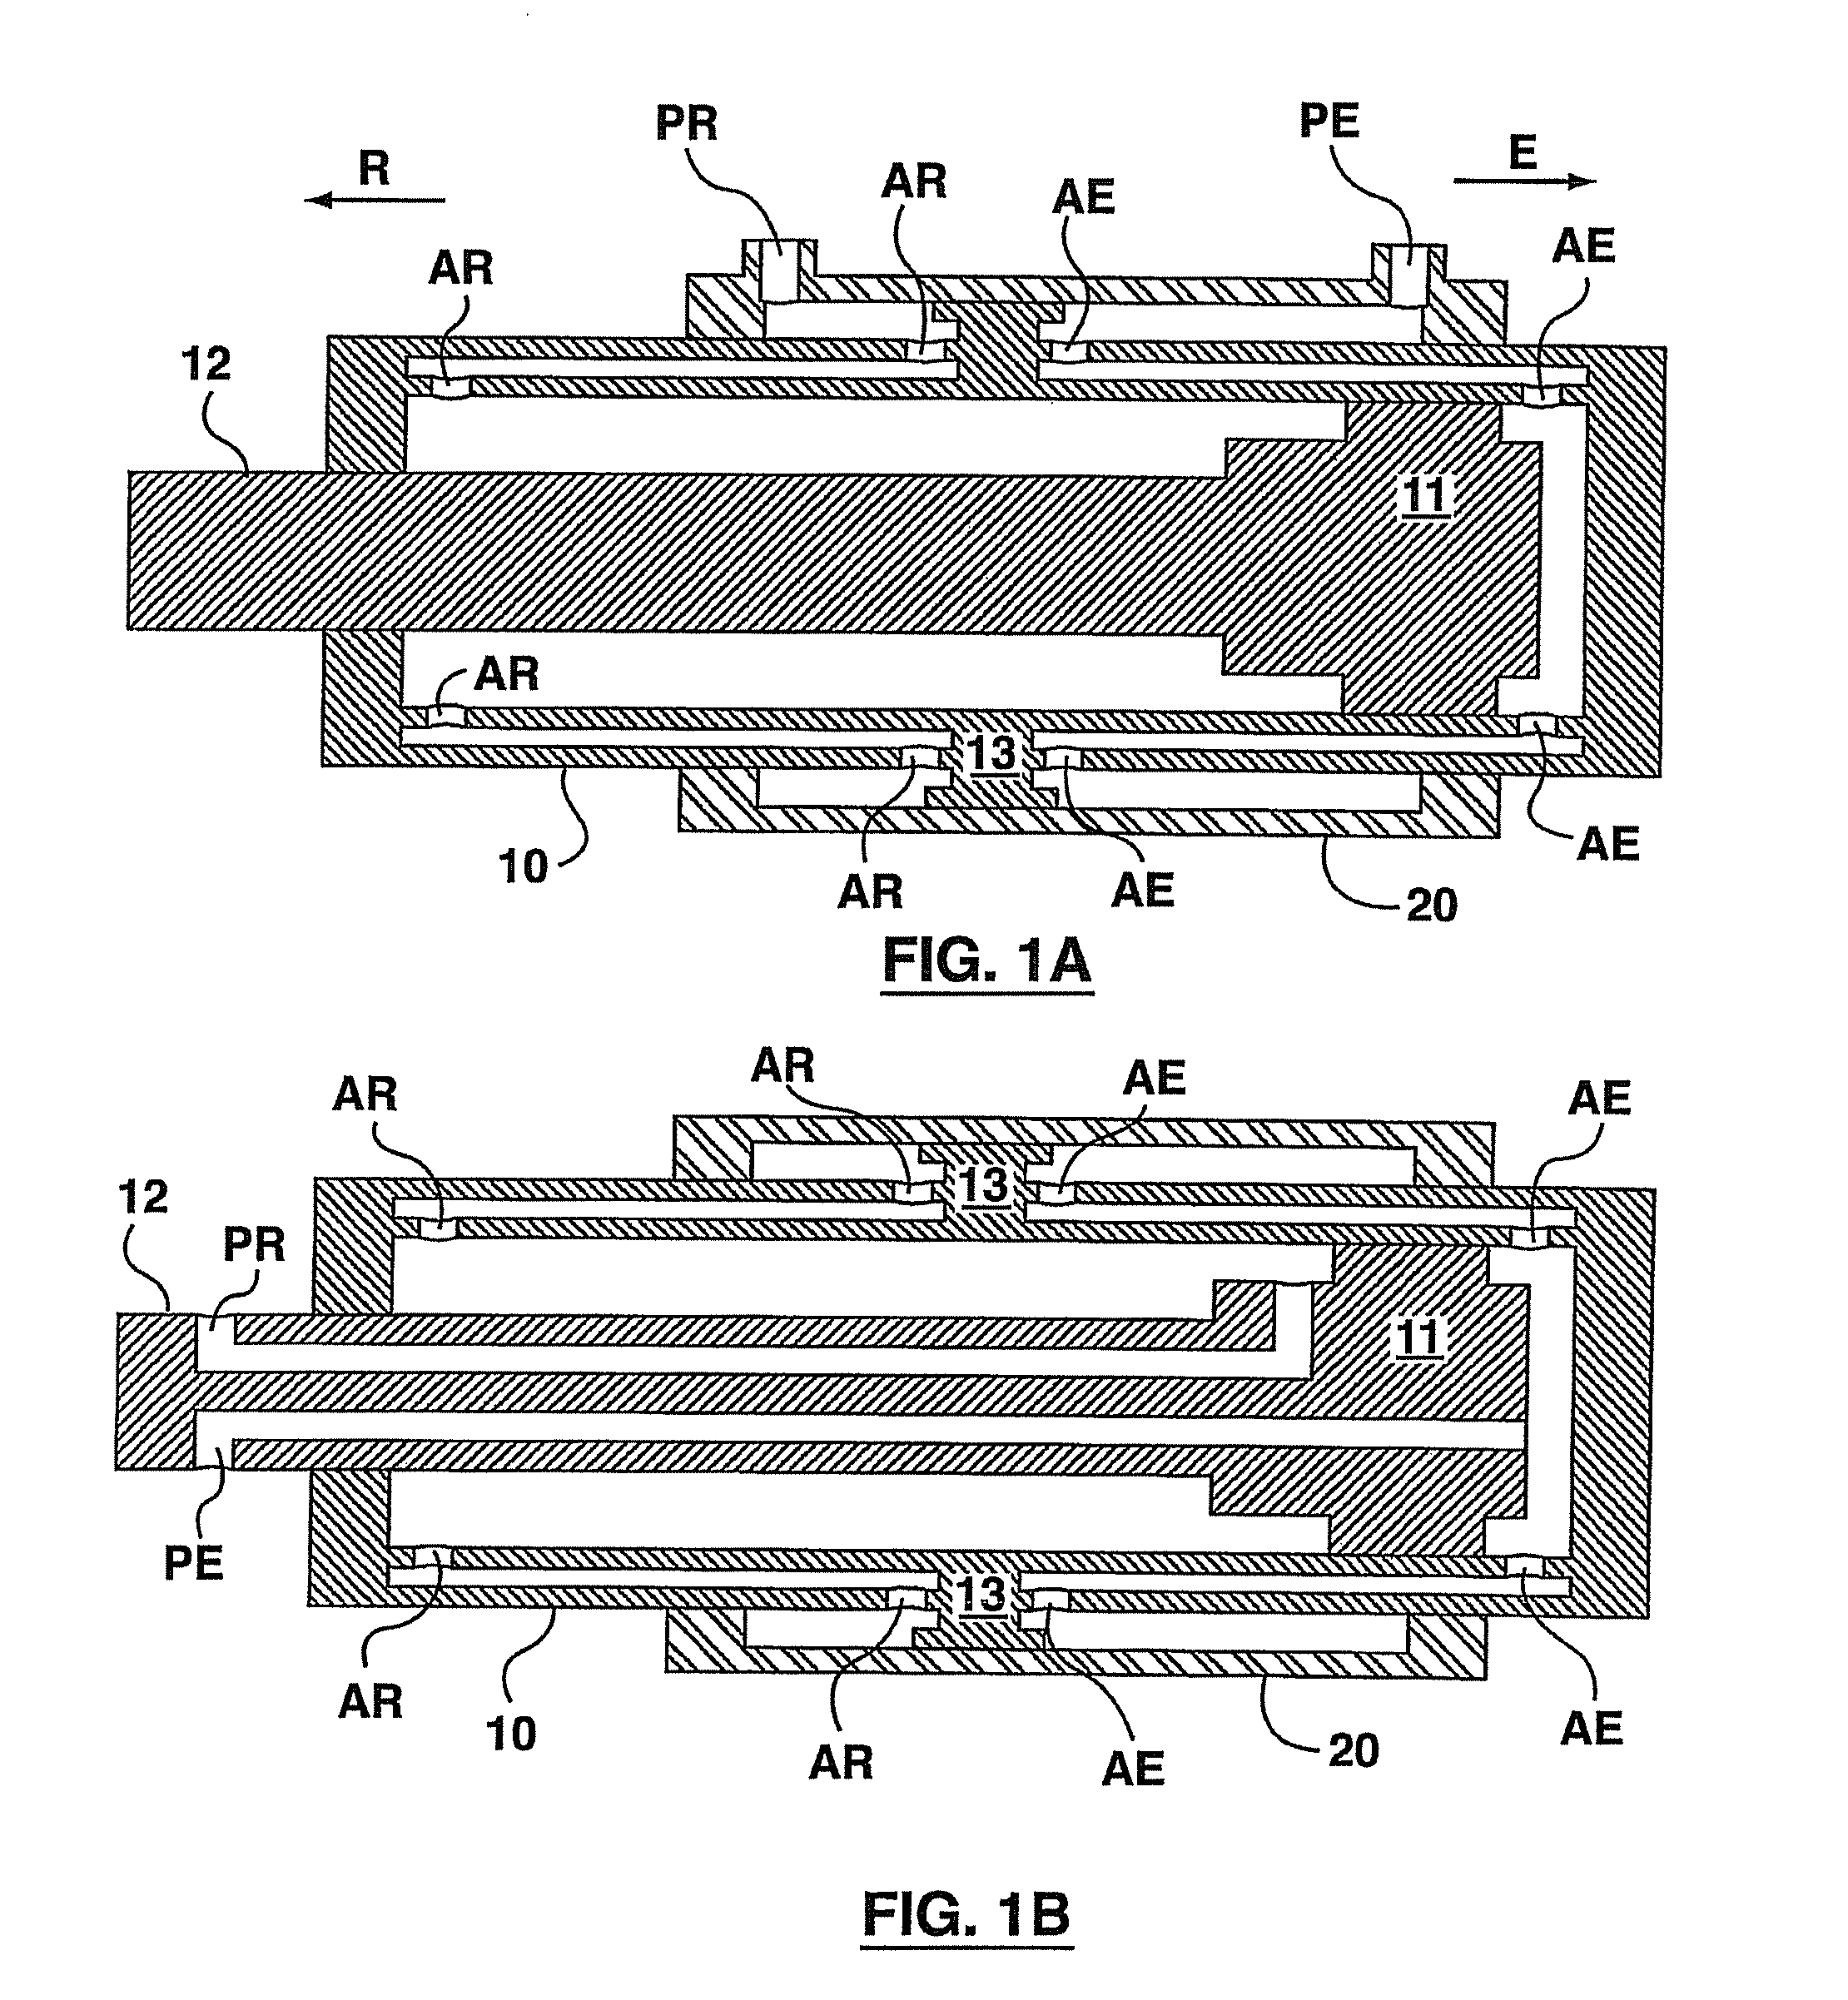 Two-stage double acting hydraulic cylinder assembly and use thereof in apparatus for digging and transplanting trees